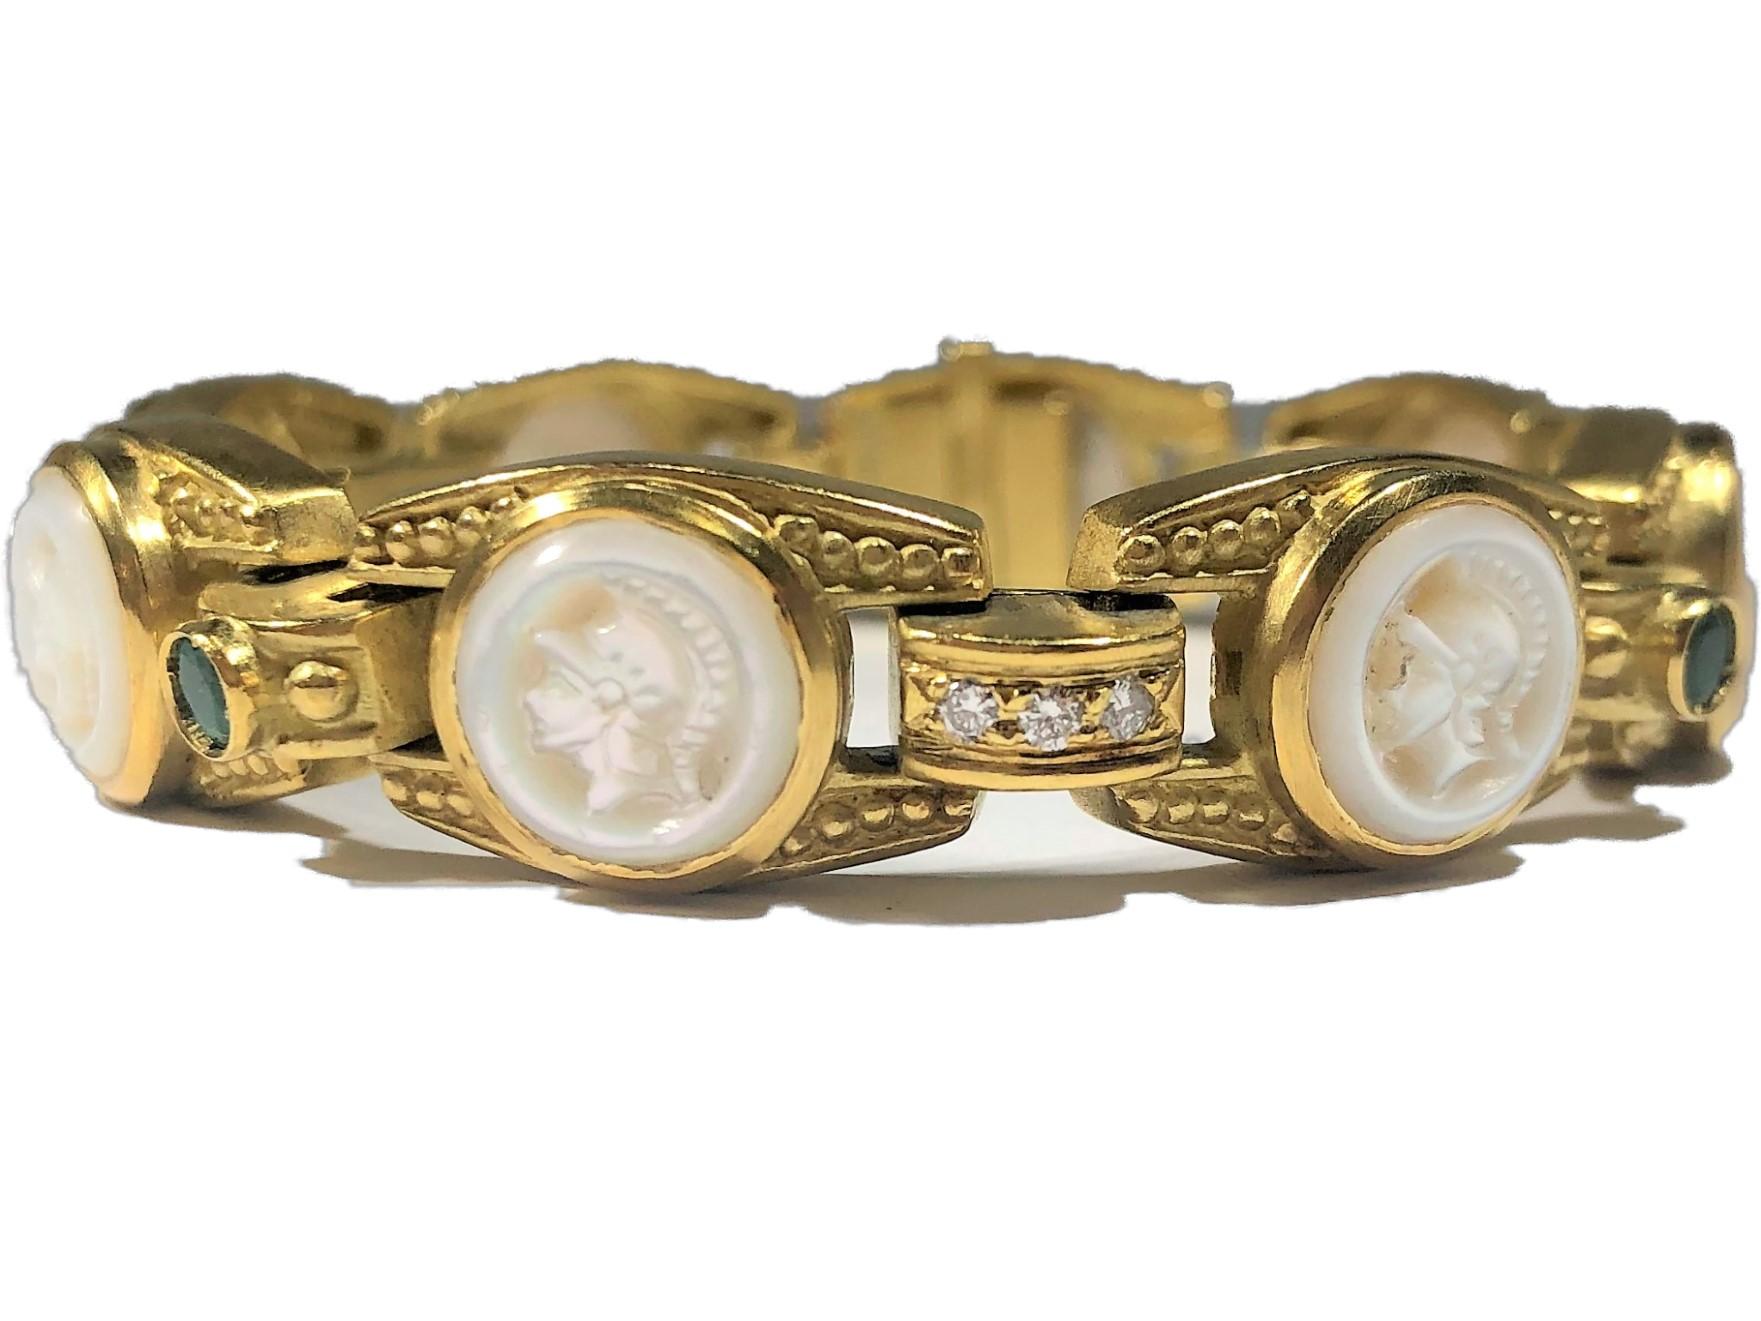 An 18K yellow gold bracelet comprised of 8 links and 8 connecting links, by Judith Ripka. Each link features a Roman centurion carved from mother of pearl, and bezel set. The connecting links alternate between collet set emeralds and pave' set